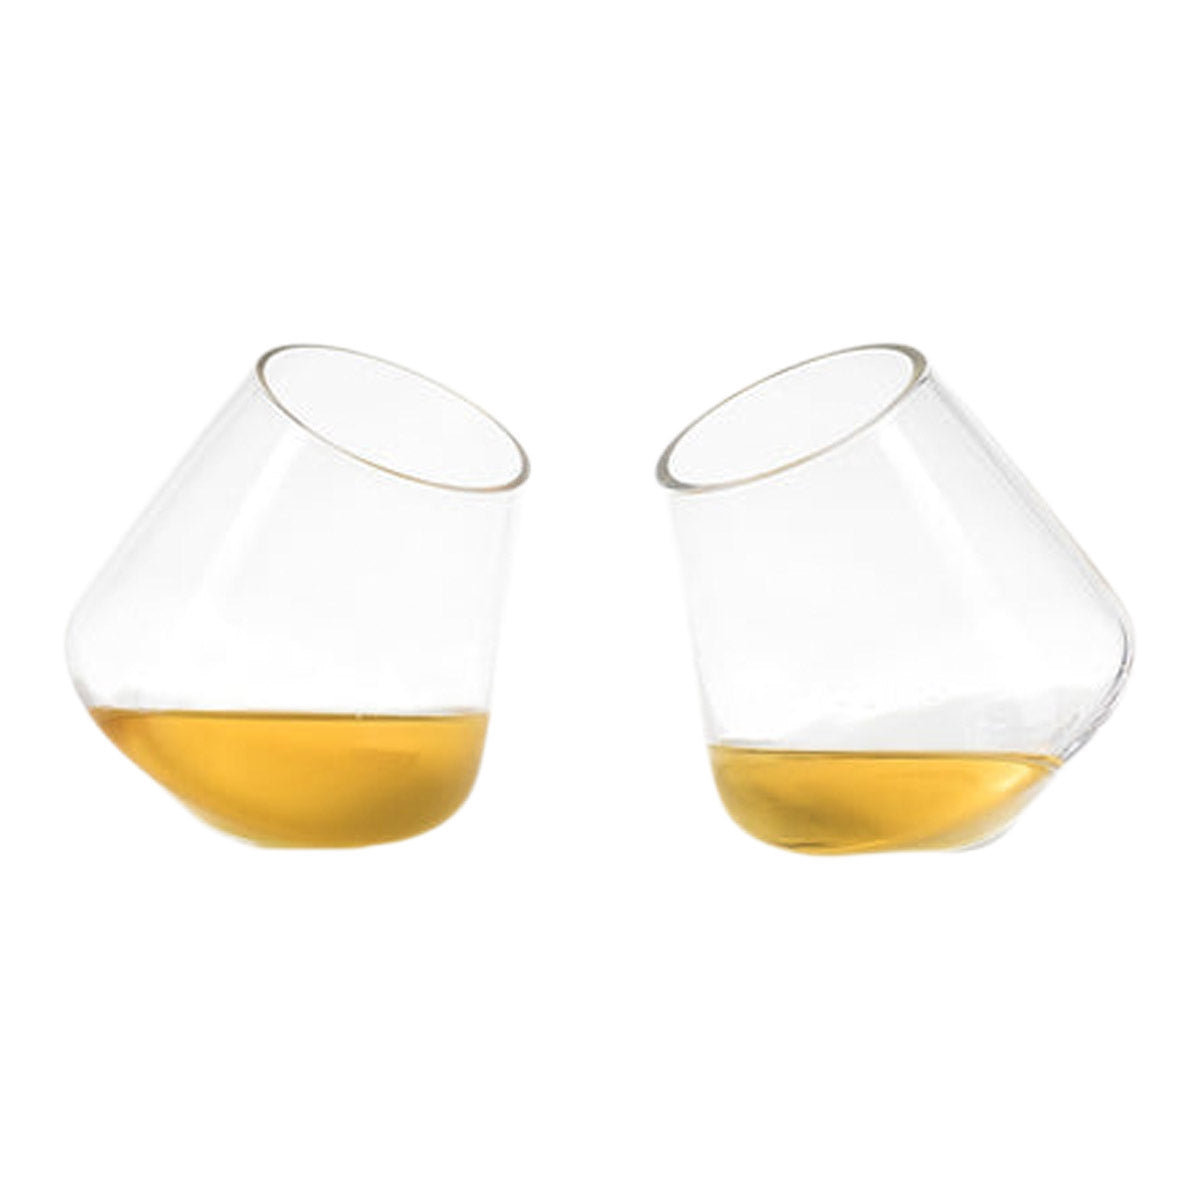 Swoon Living Pair of 5oz Whiskey Glasses with Stand